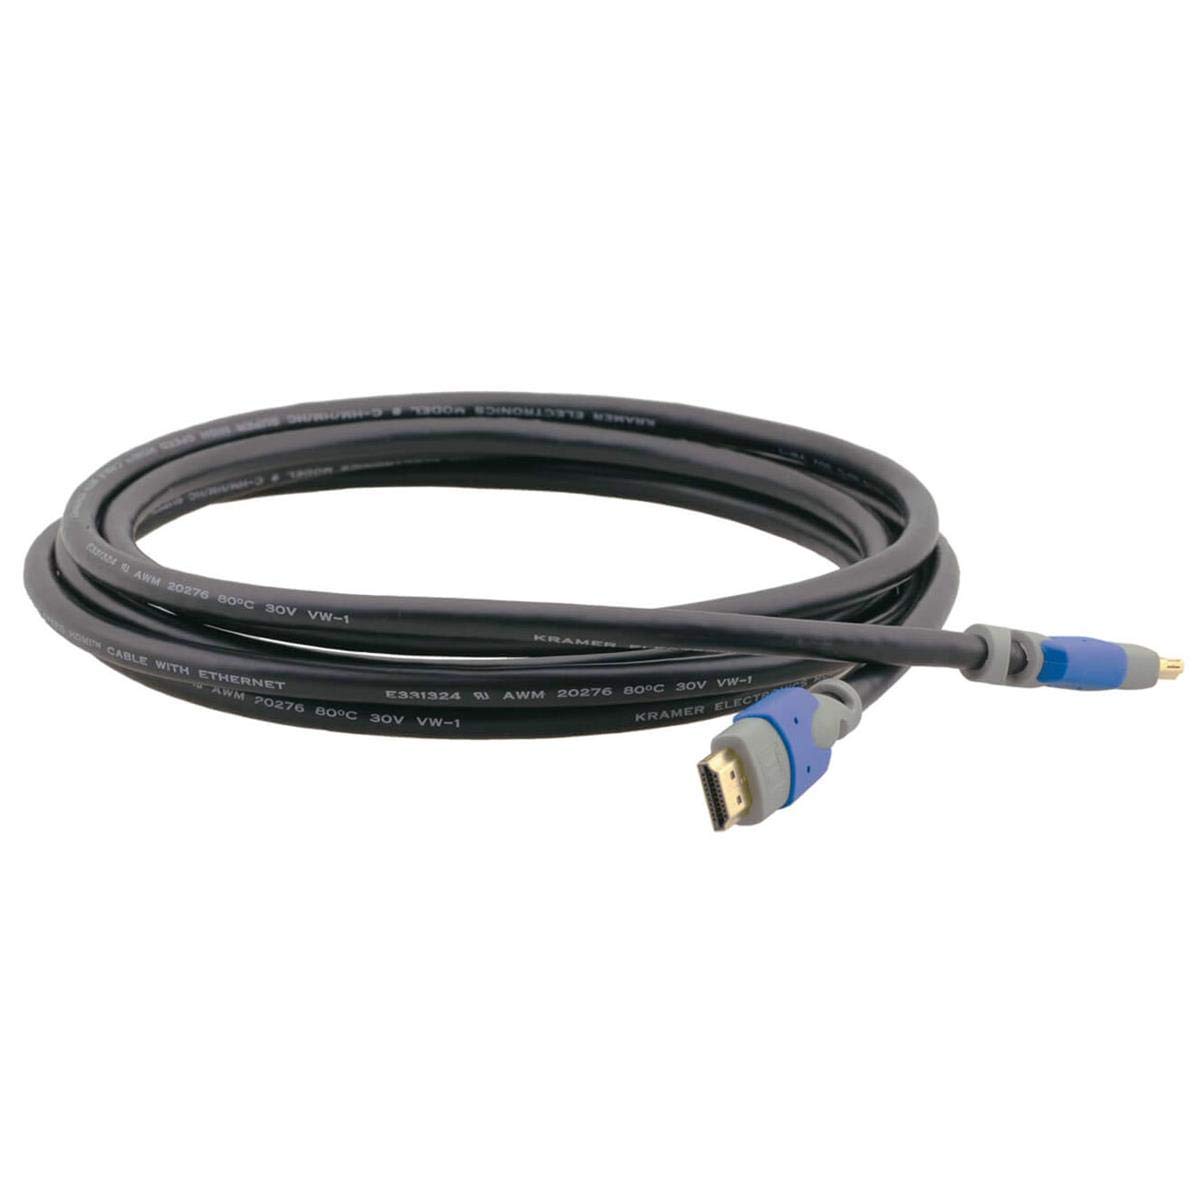 HDMI TO HDMI CABLE WITH ETHERNE